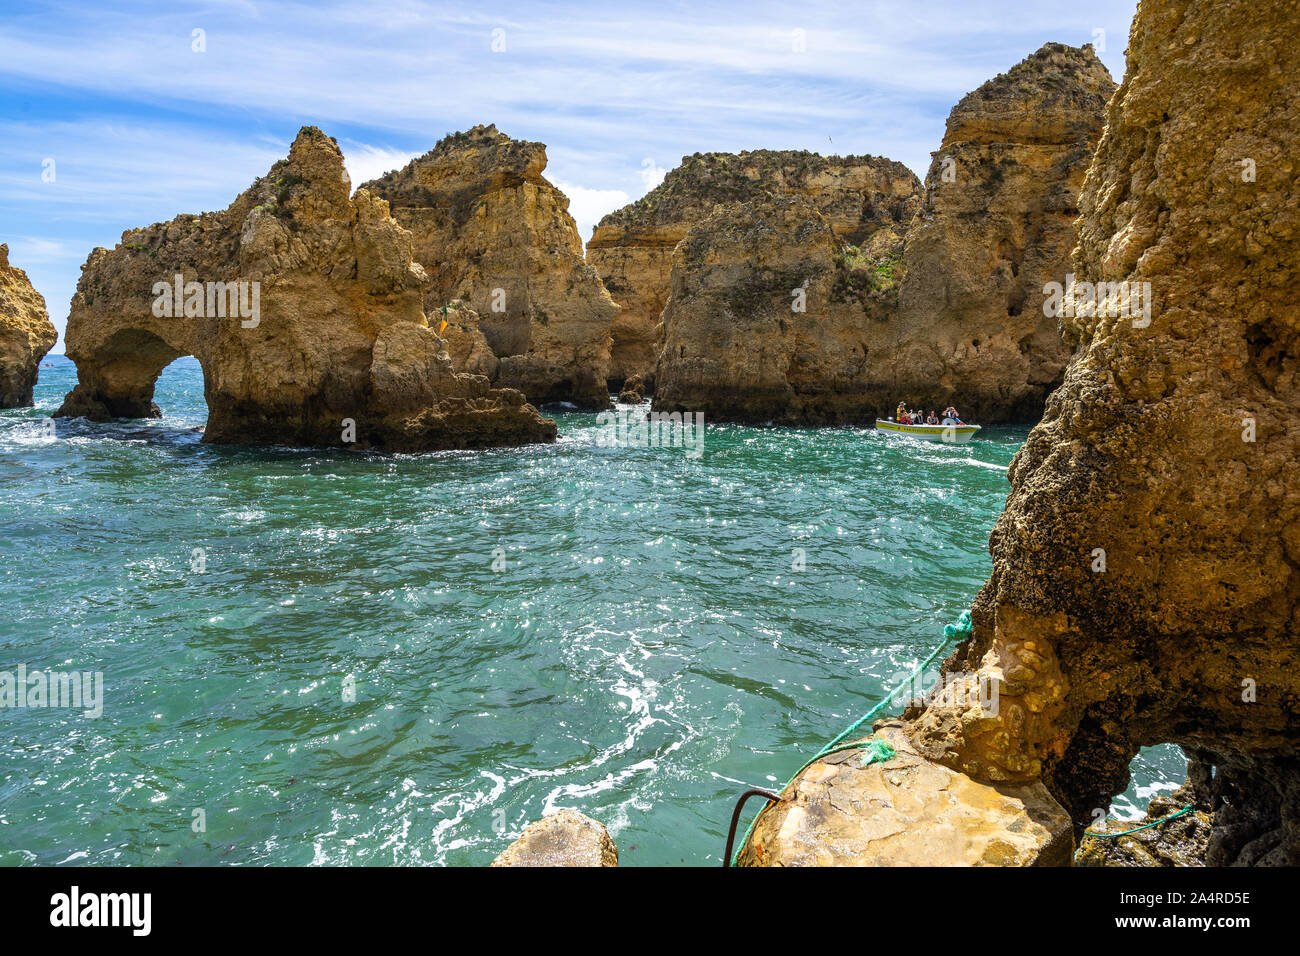 The golden cliffs and turquoise ocean waters at Ponta da Piedade, one of the most iconic landscape of Algarve, Portugal Stock Photo